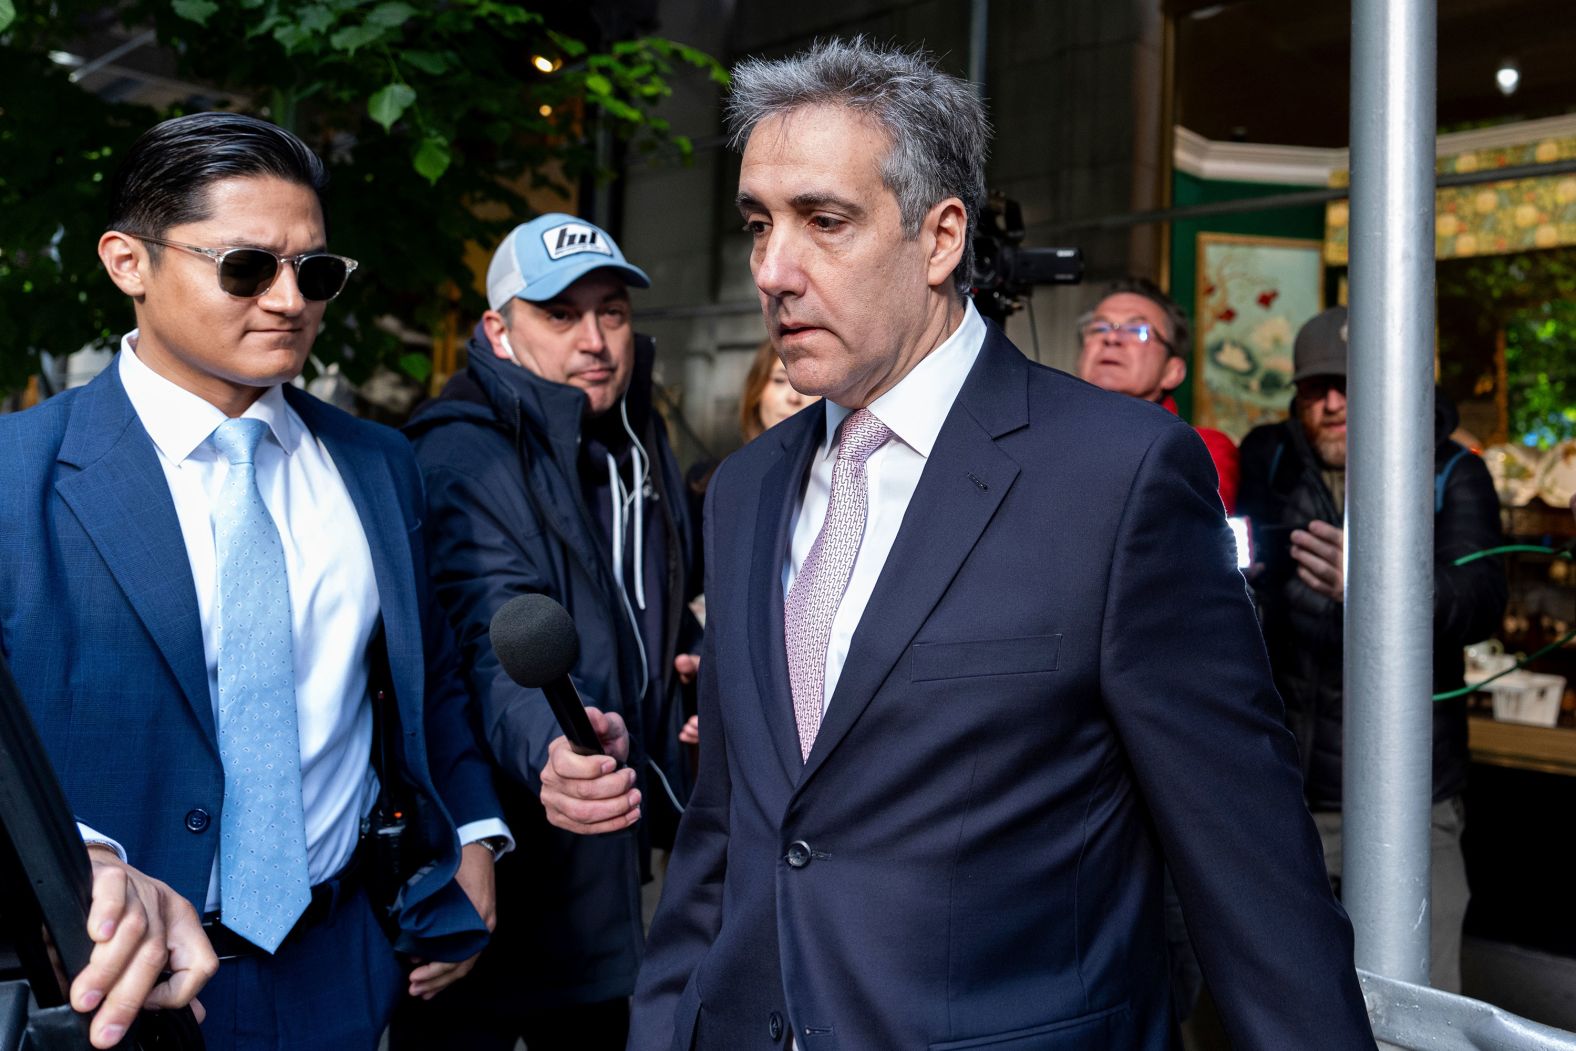 Michael Cohen, Donald Trump's former personal attorney, leaves his apartment building in New York on his way to Manhattan criminal court on Monday, May 13. <a href="index.php?page=&url=https%3A%2F%2Fwww.cnn.com%2Fpolitics%2Flive-news%2Ftrump-hush-money-trial-05-16-24%2Findex.html" target="_blank">Cohen has been testifying this week</a> in Trump's hush money trial. Cohen says Trump directed him to pay hush money to Stormy Daniels in the final days of the 2016 presidential campaign. Trump denies the allegations.